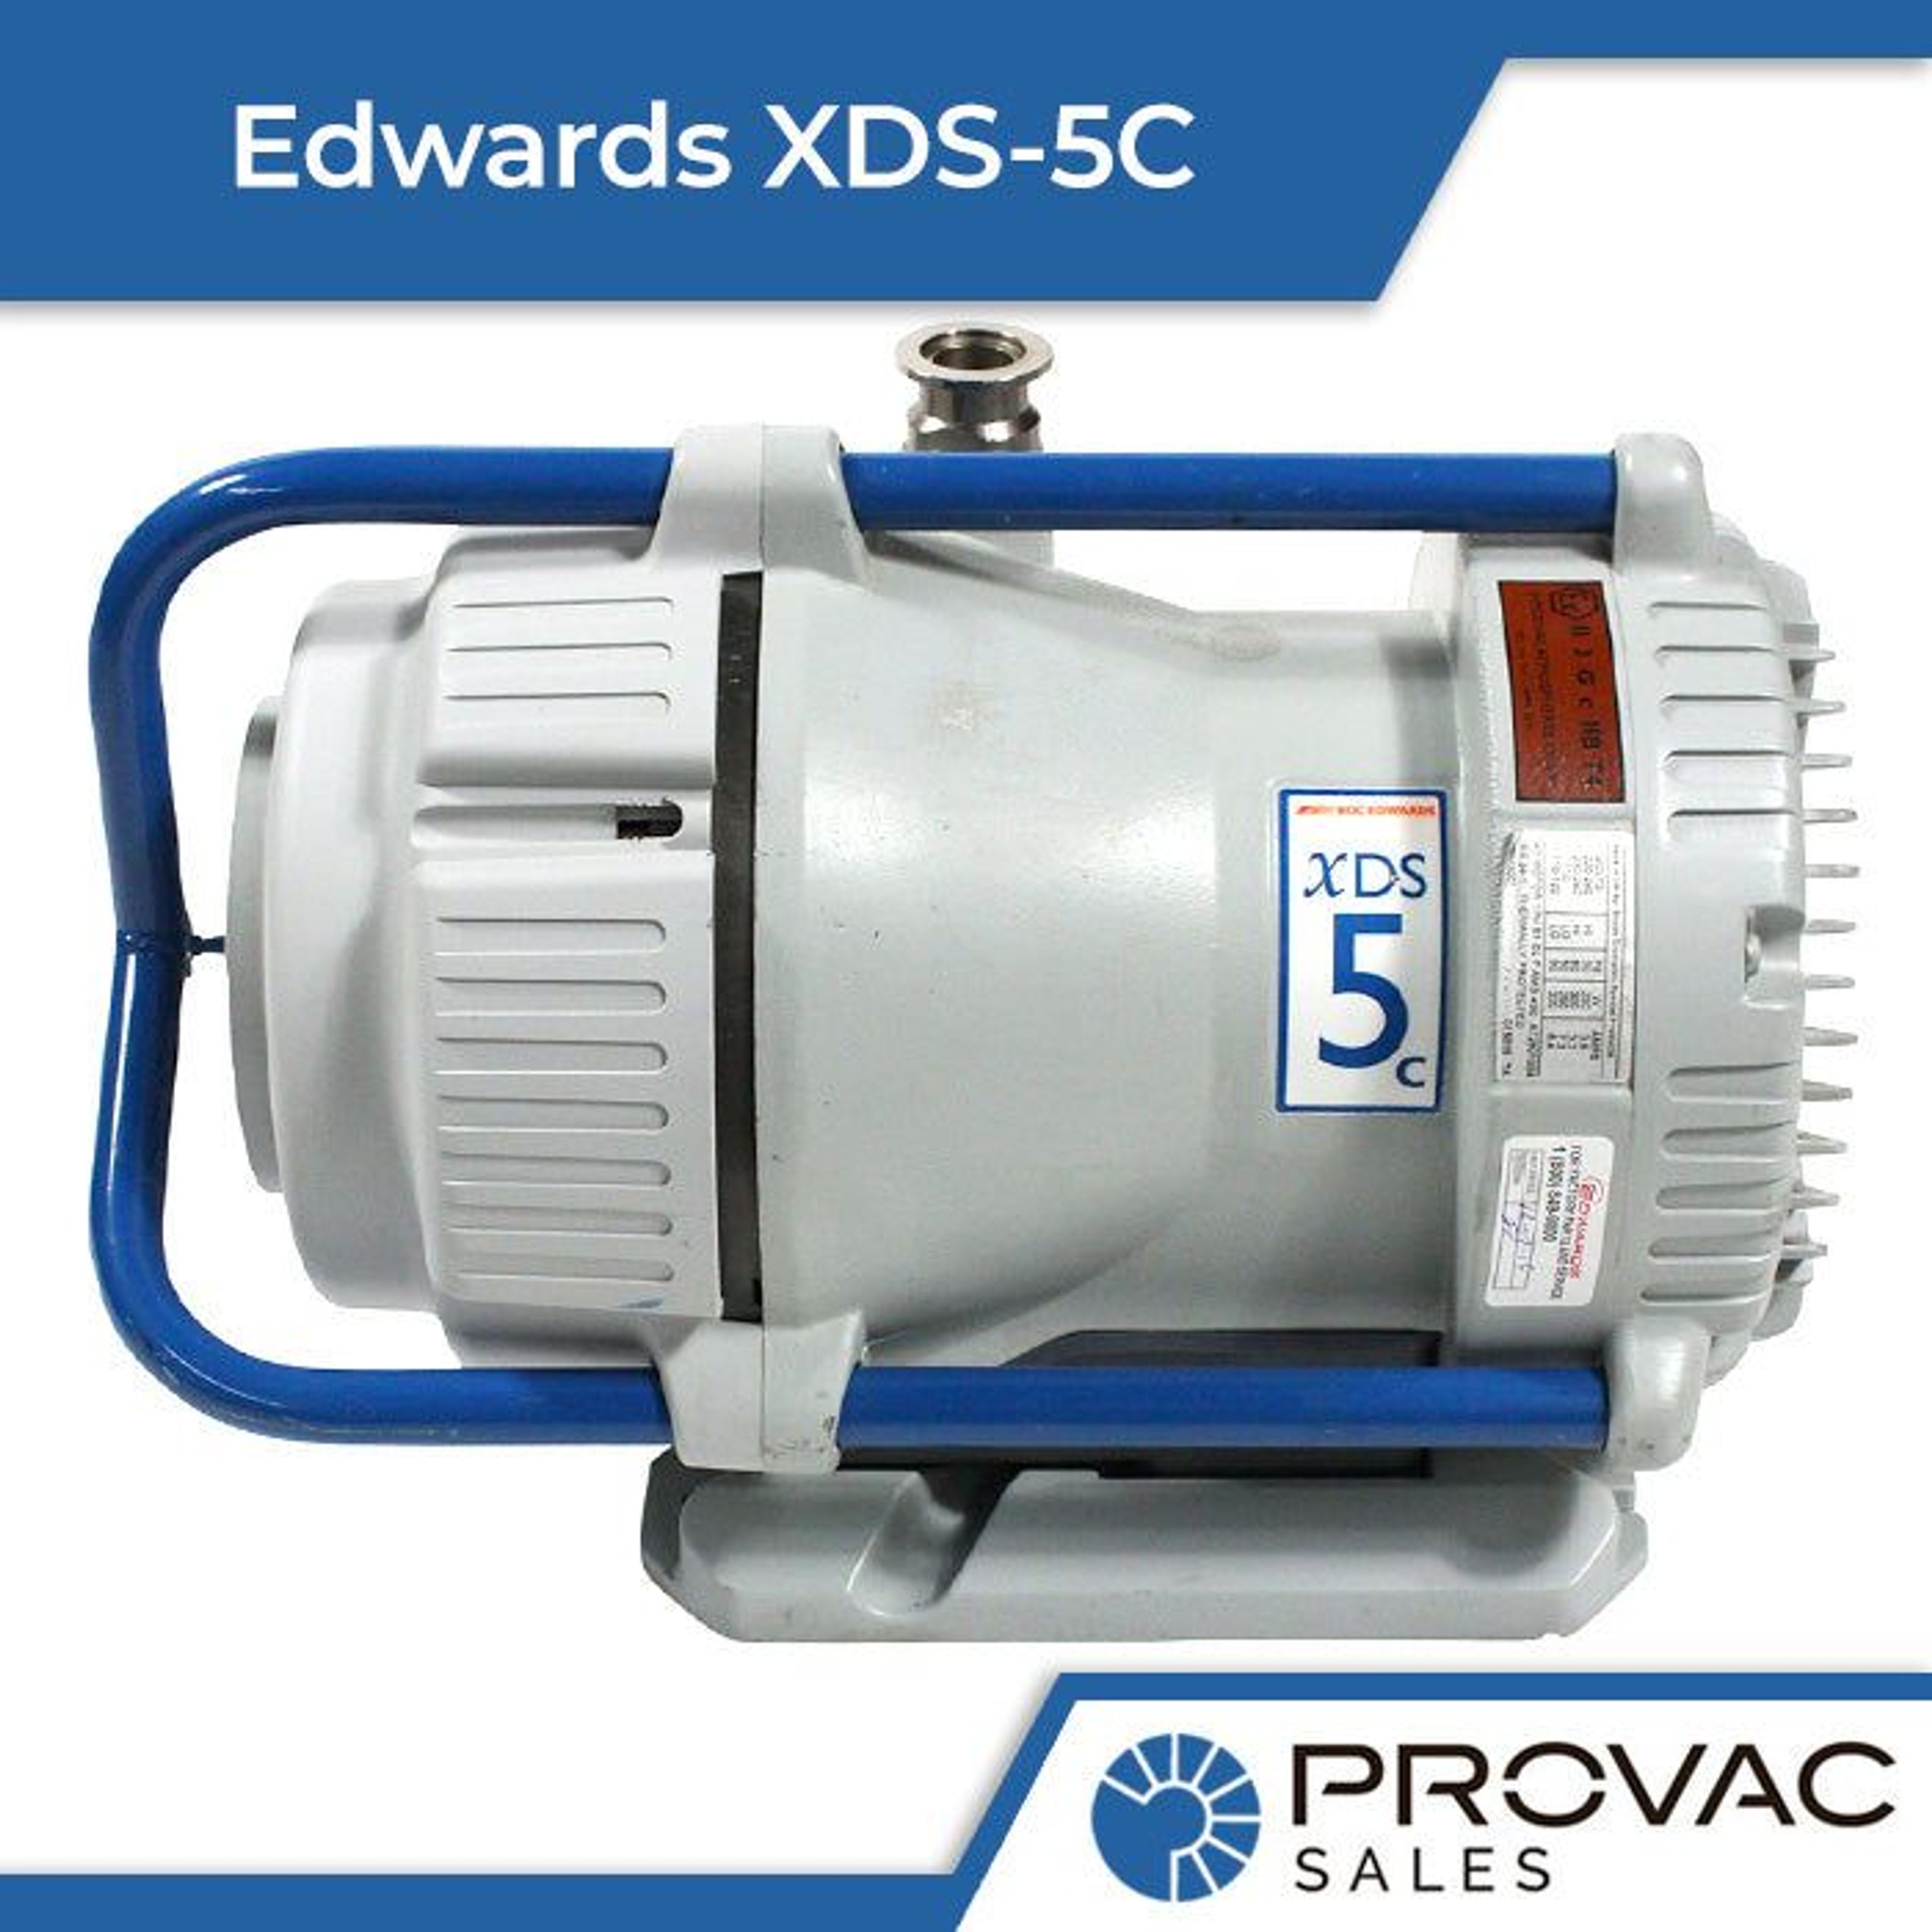 Edwards XDS-5C Scroll Pump: In Stock, Ready to Ship Background